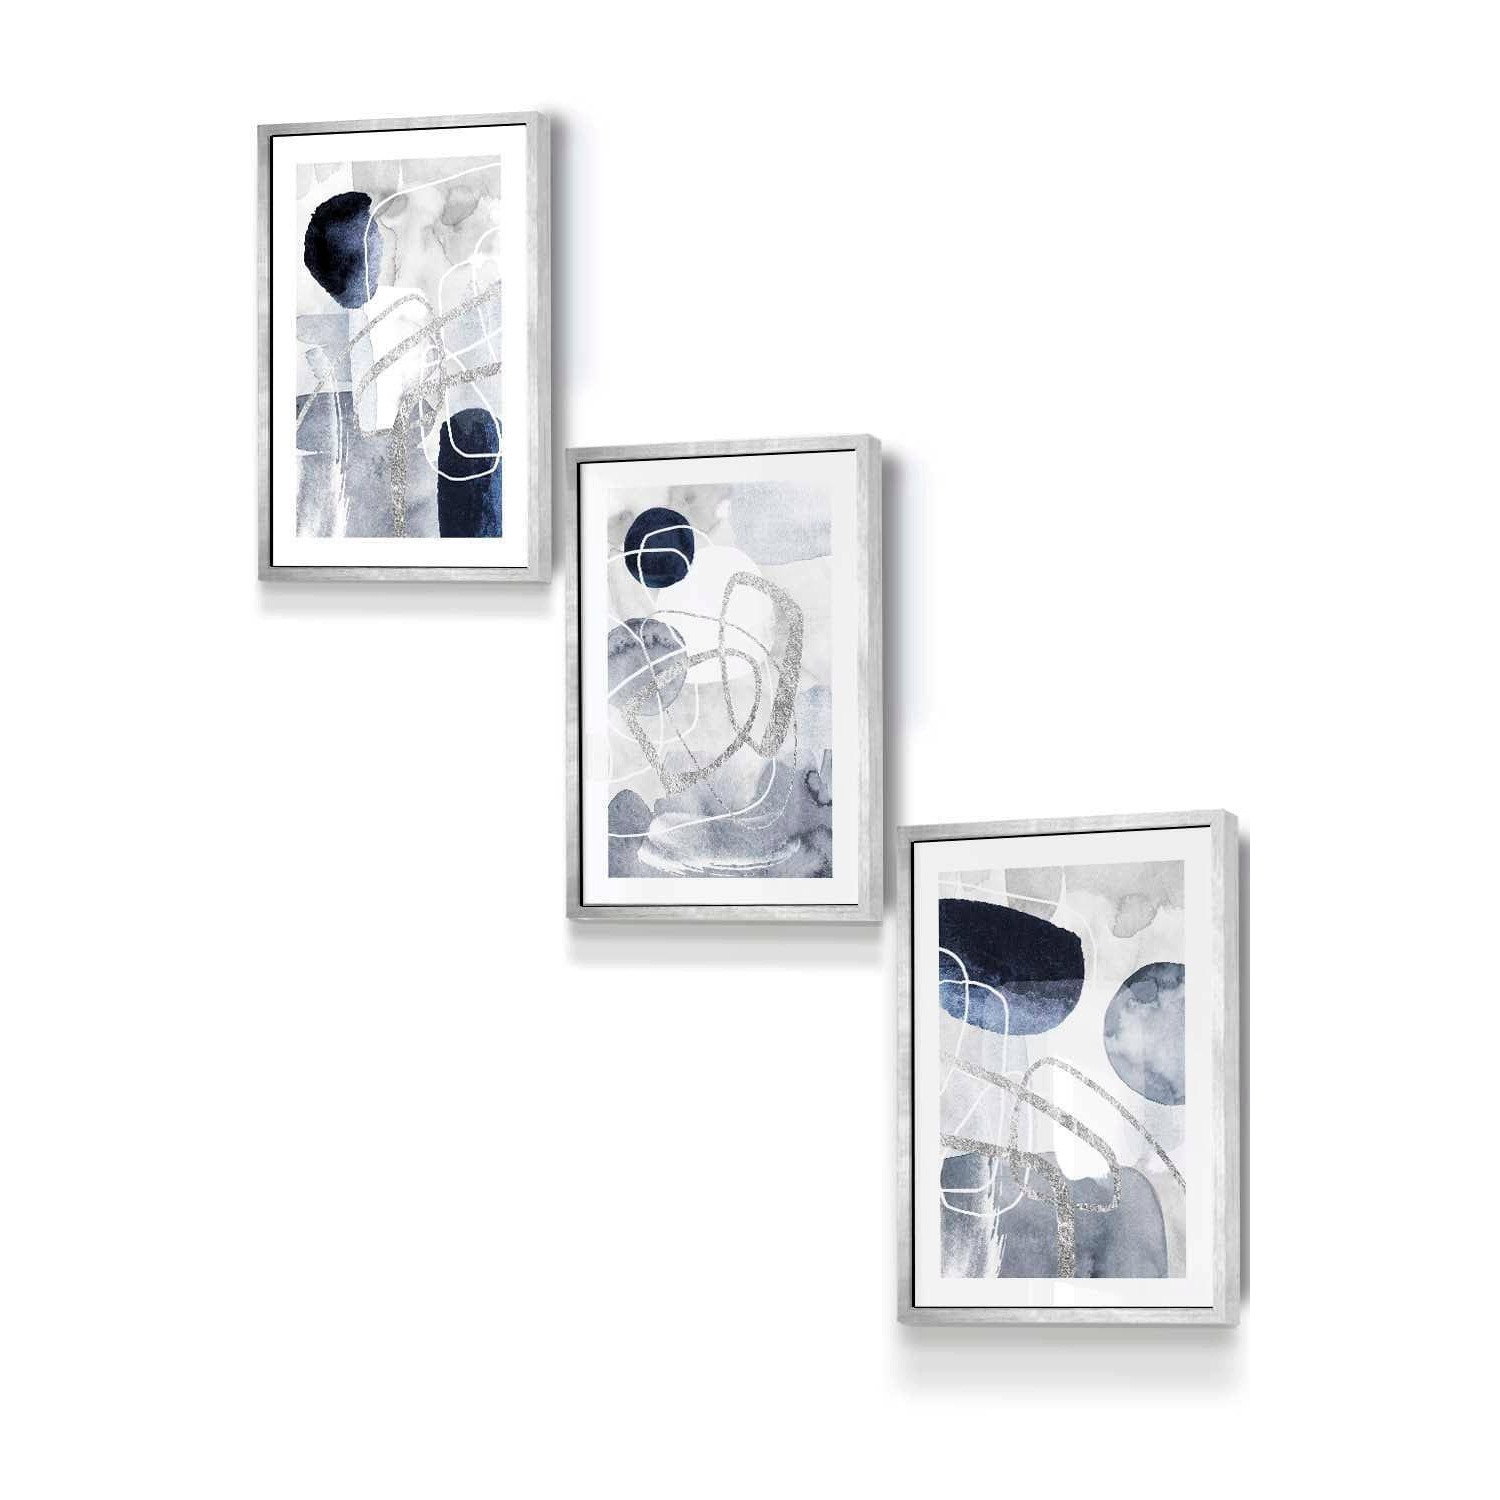 Set of 3 Silver Framed Abstract Navy Blue and Silver Watercolour Shapes Wall Art - image 1